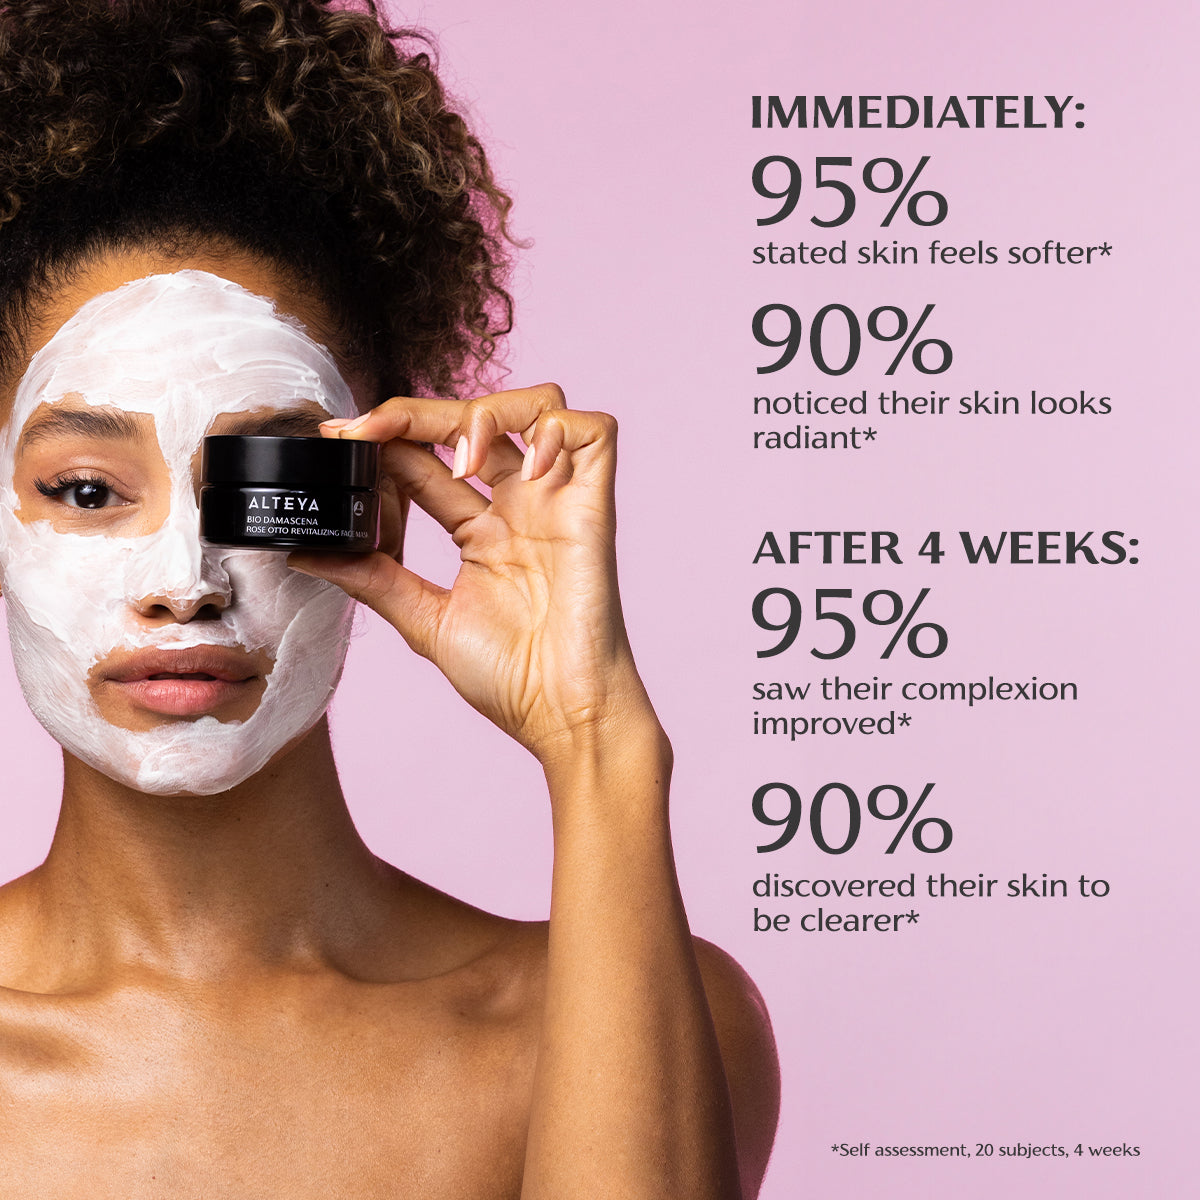 A person applying a BIO DAMASCENA ROSE OTTO REVITALIZING FACE MASK while holding a skincare product, with statistics on skin improvement over time displayed on the side.